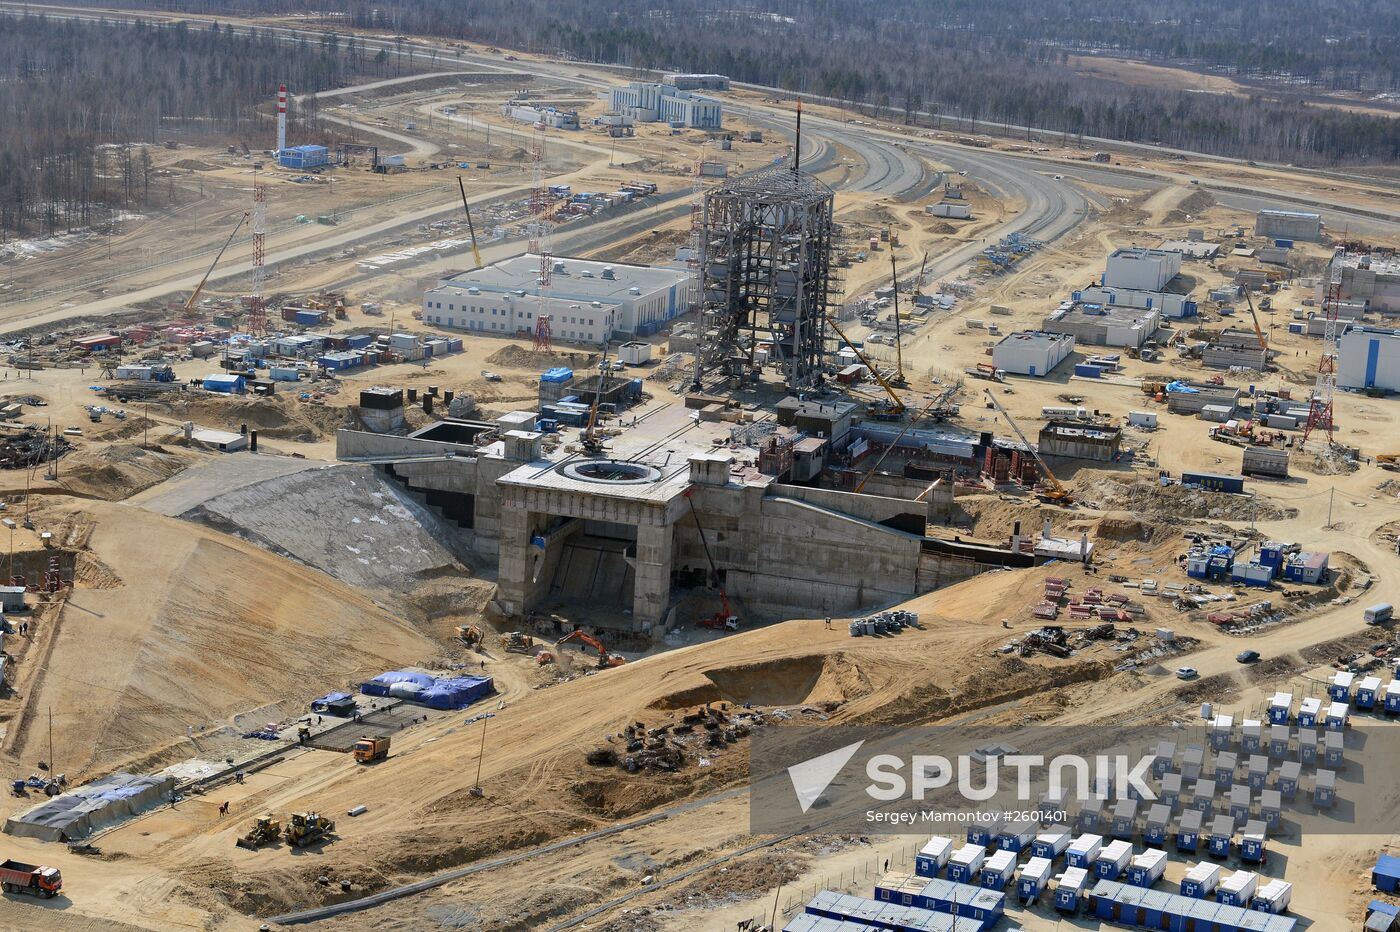 Dmitry Rogozin meets with builders at the unfinished Vostochny (Eastern) space center